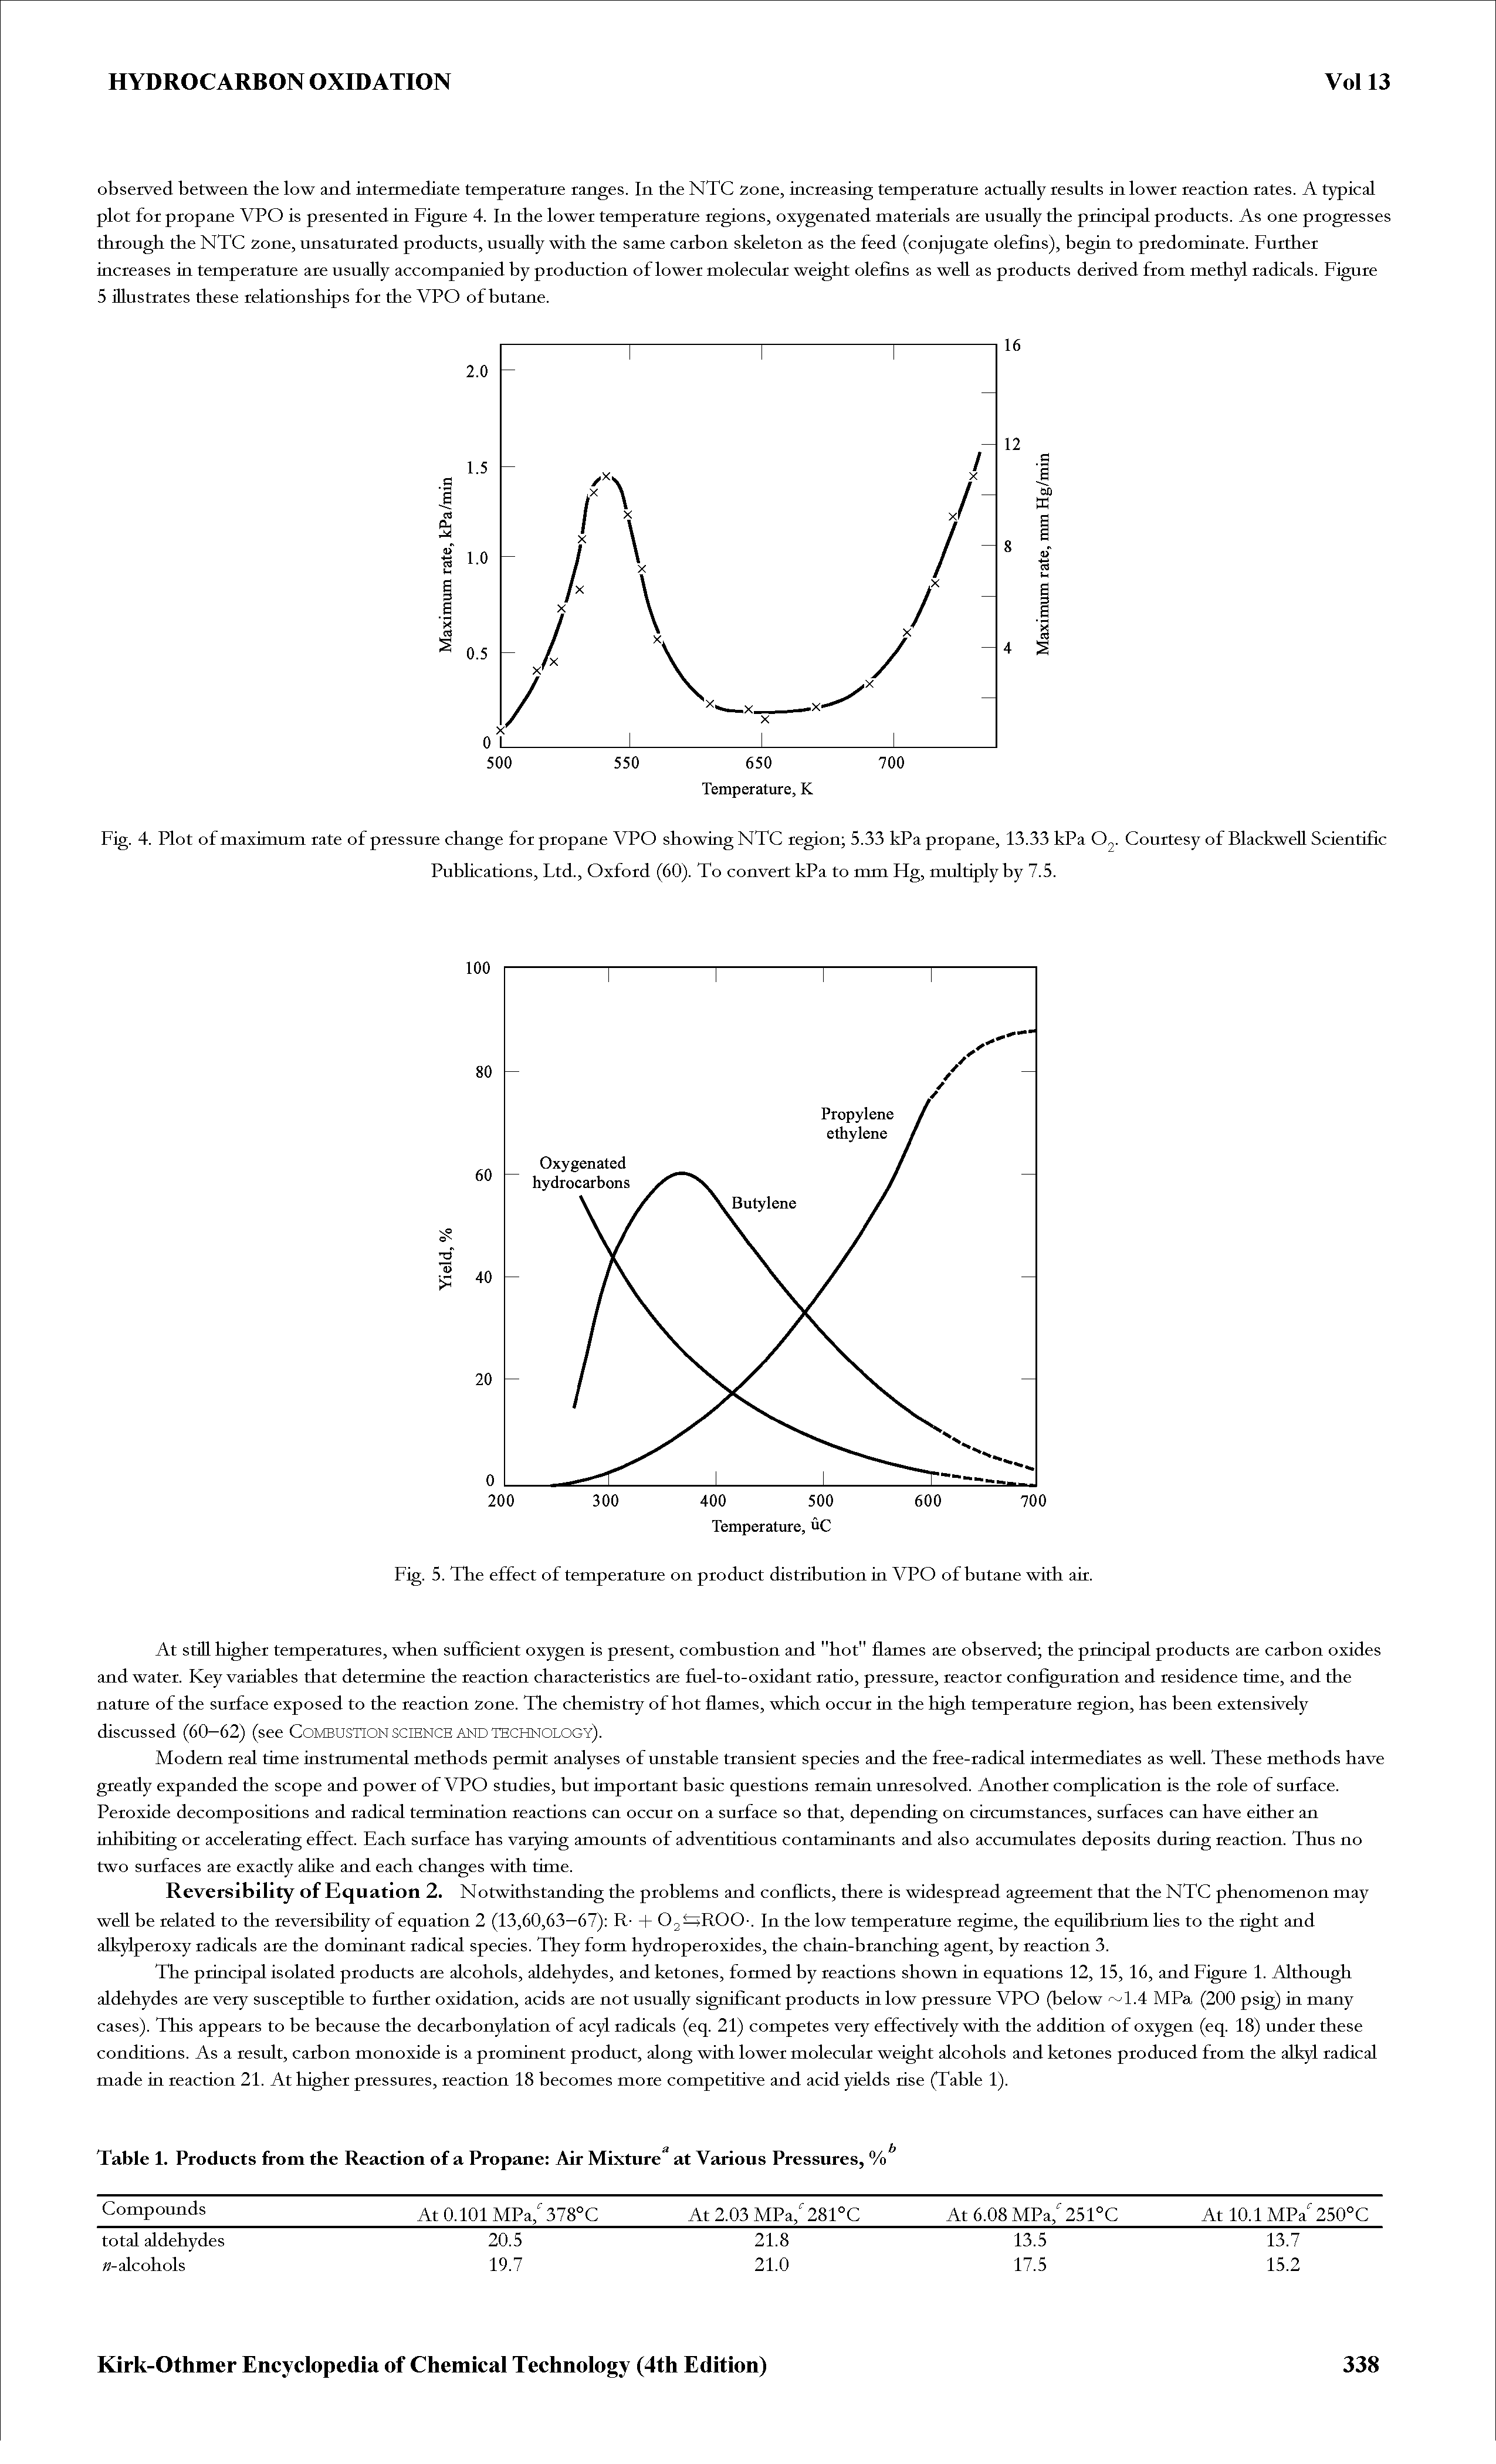 Fig. 5. The effect of temperature on product distribution in VPO of butane with air.